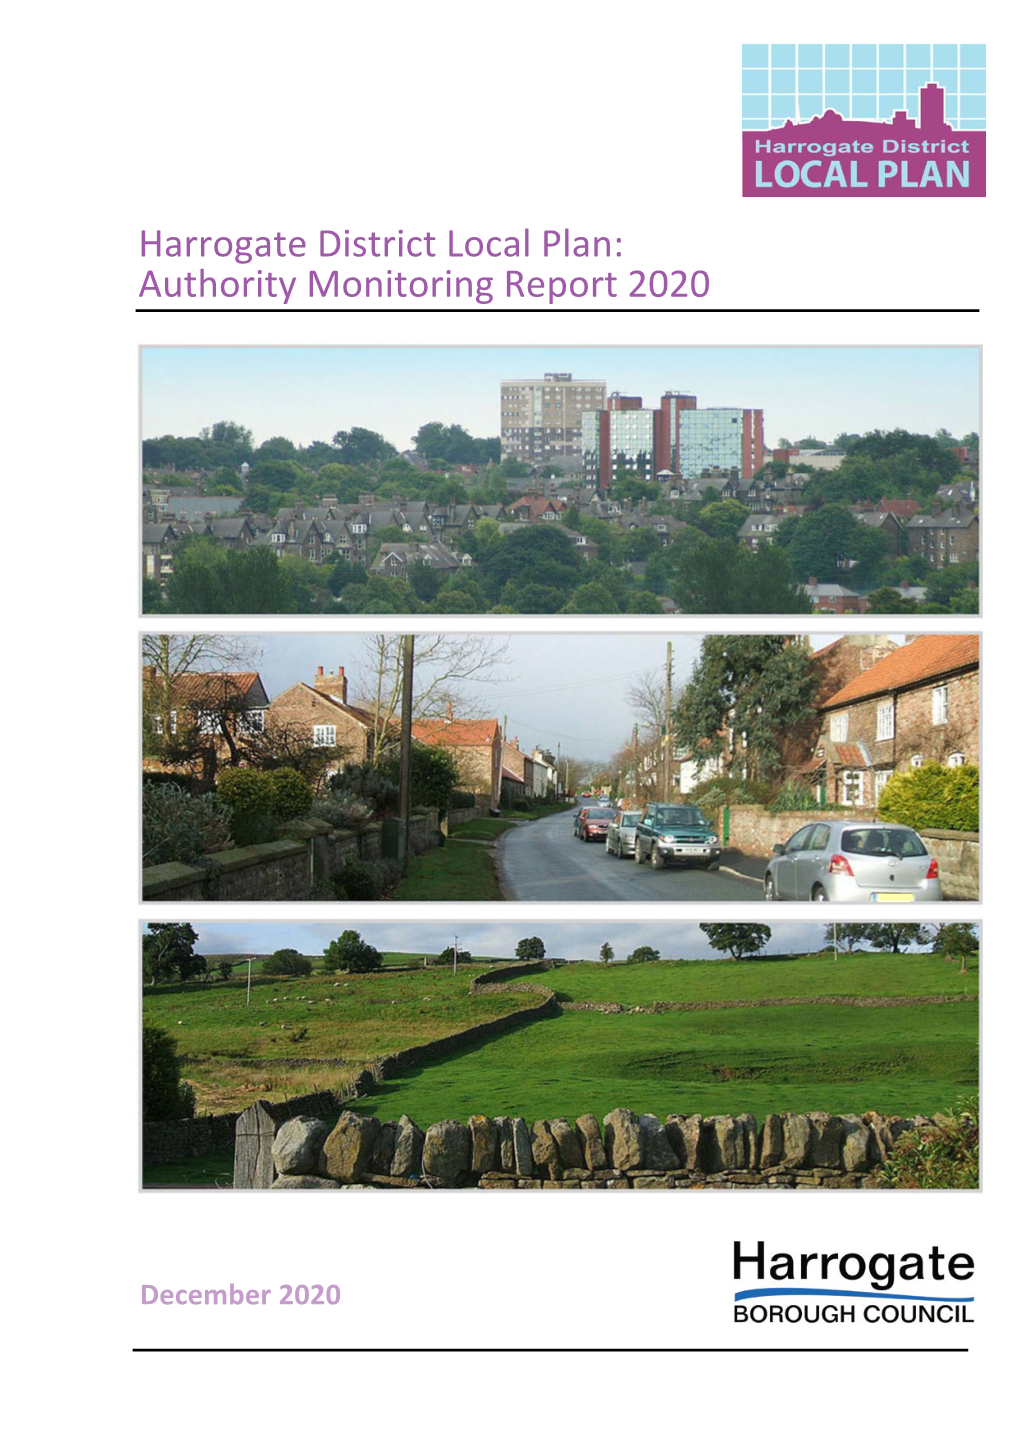 Harrogate District Local Plan: Authority Monitoring Report 2020